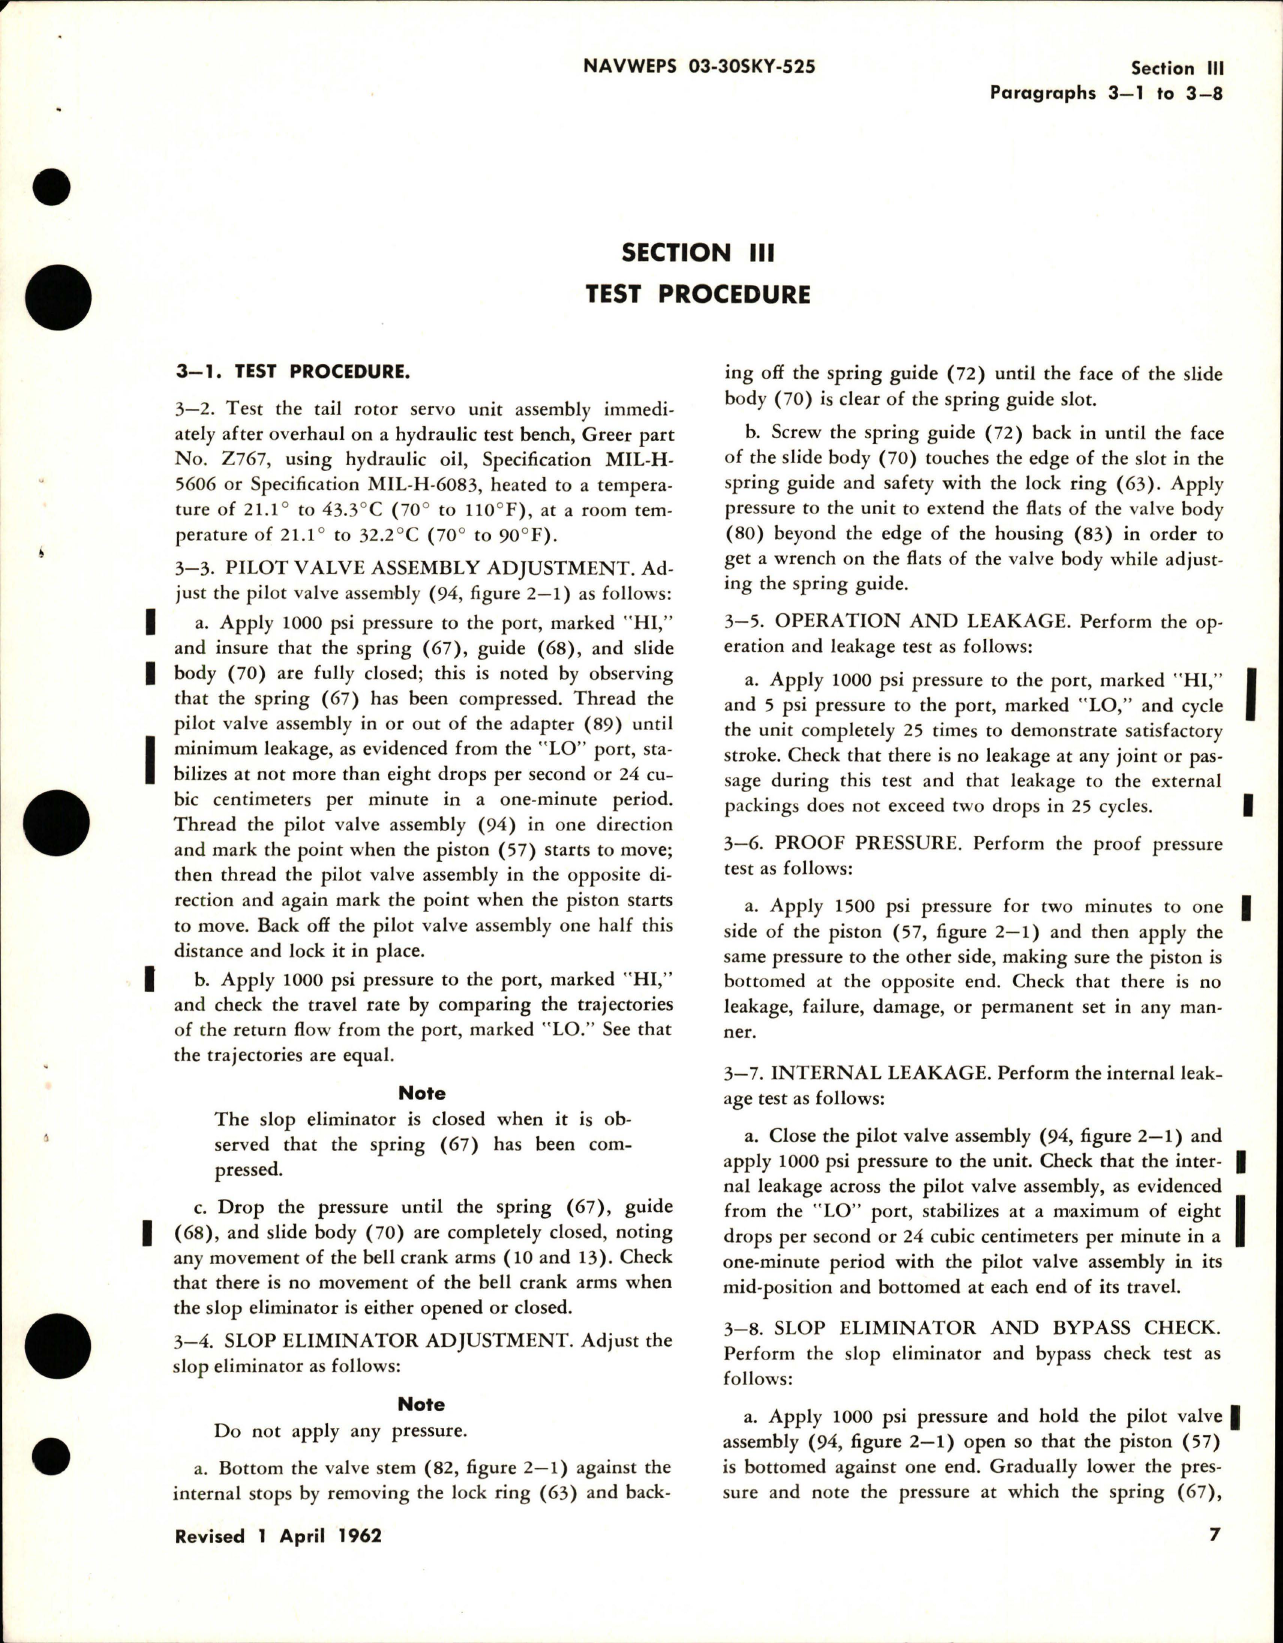 Sample page 5 from AirCorps Library document: Overhaul Instructions for Tail Rotor Servo Unit Assembly - Part S14-40-5144 